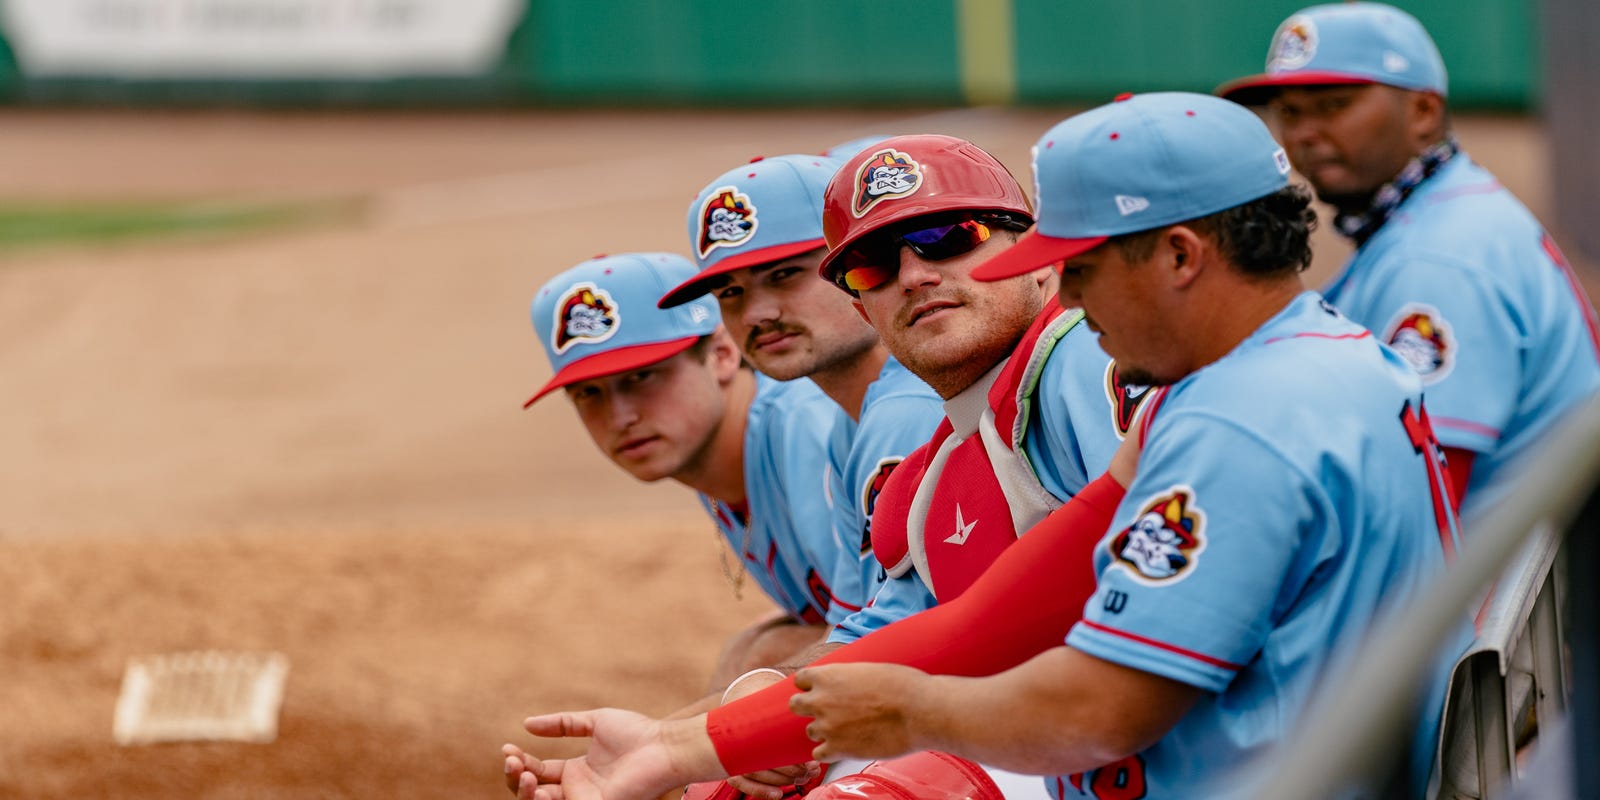 What We Know About Peoria Chiefs 2021 Season Schedule, Tickets, Promos